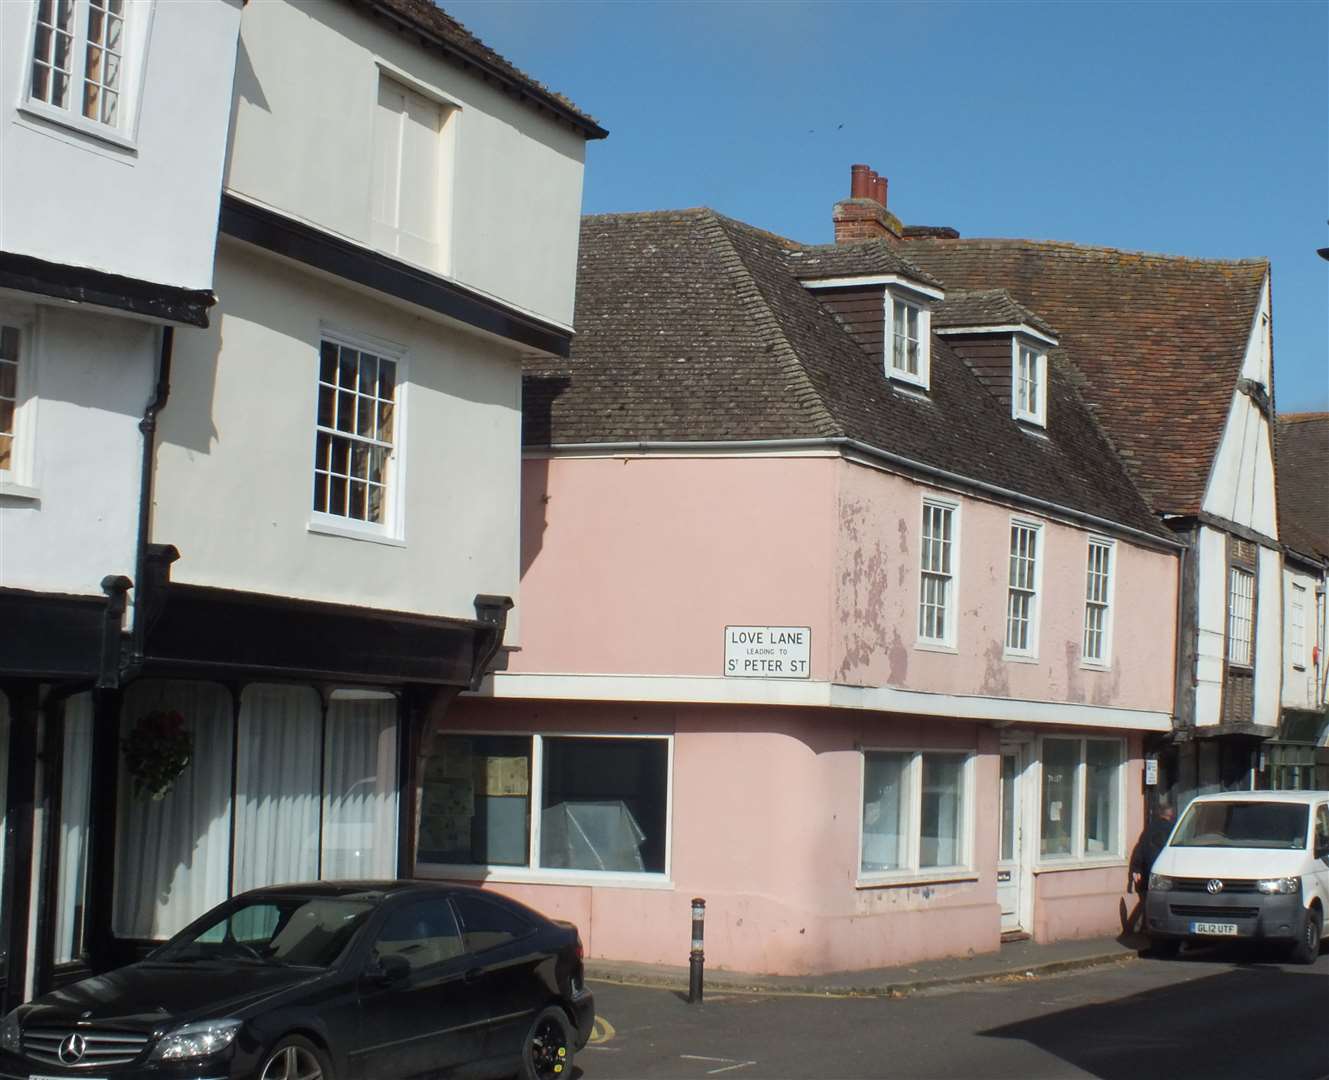 Griggs lived in Strand Street in Sandwich